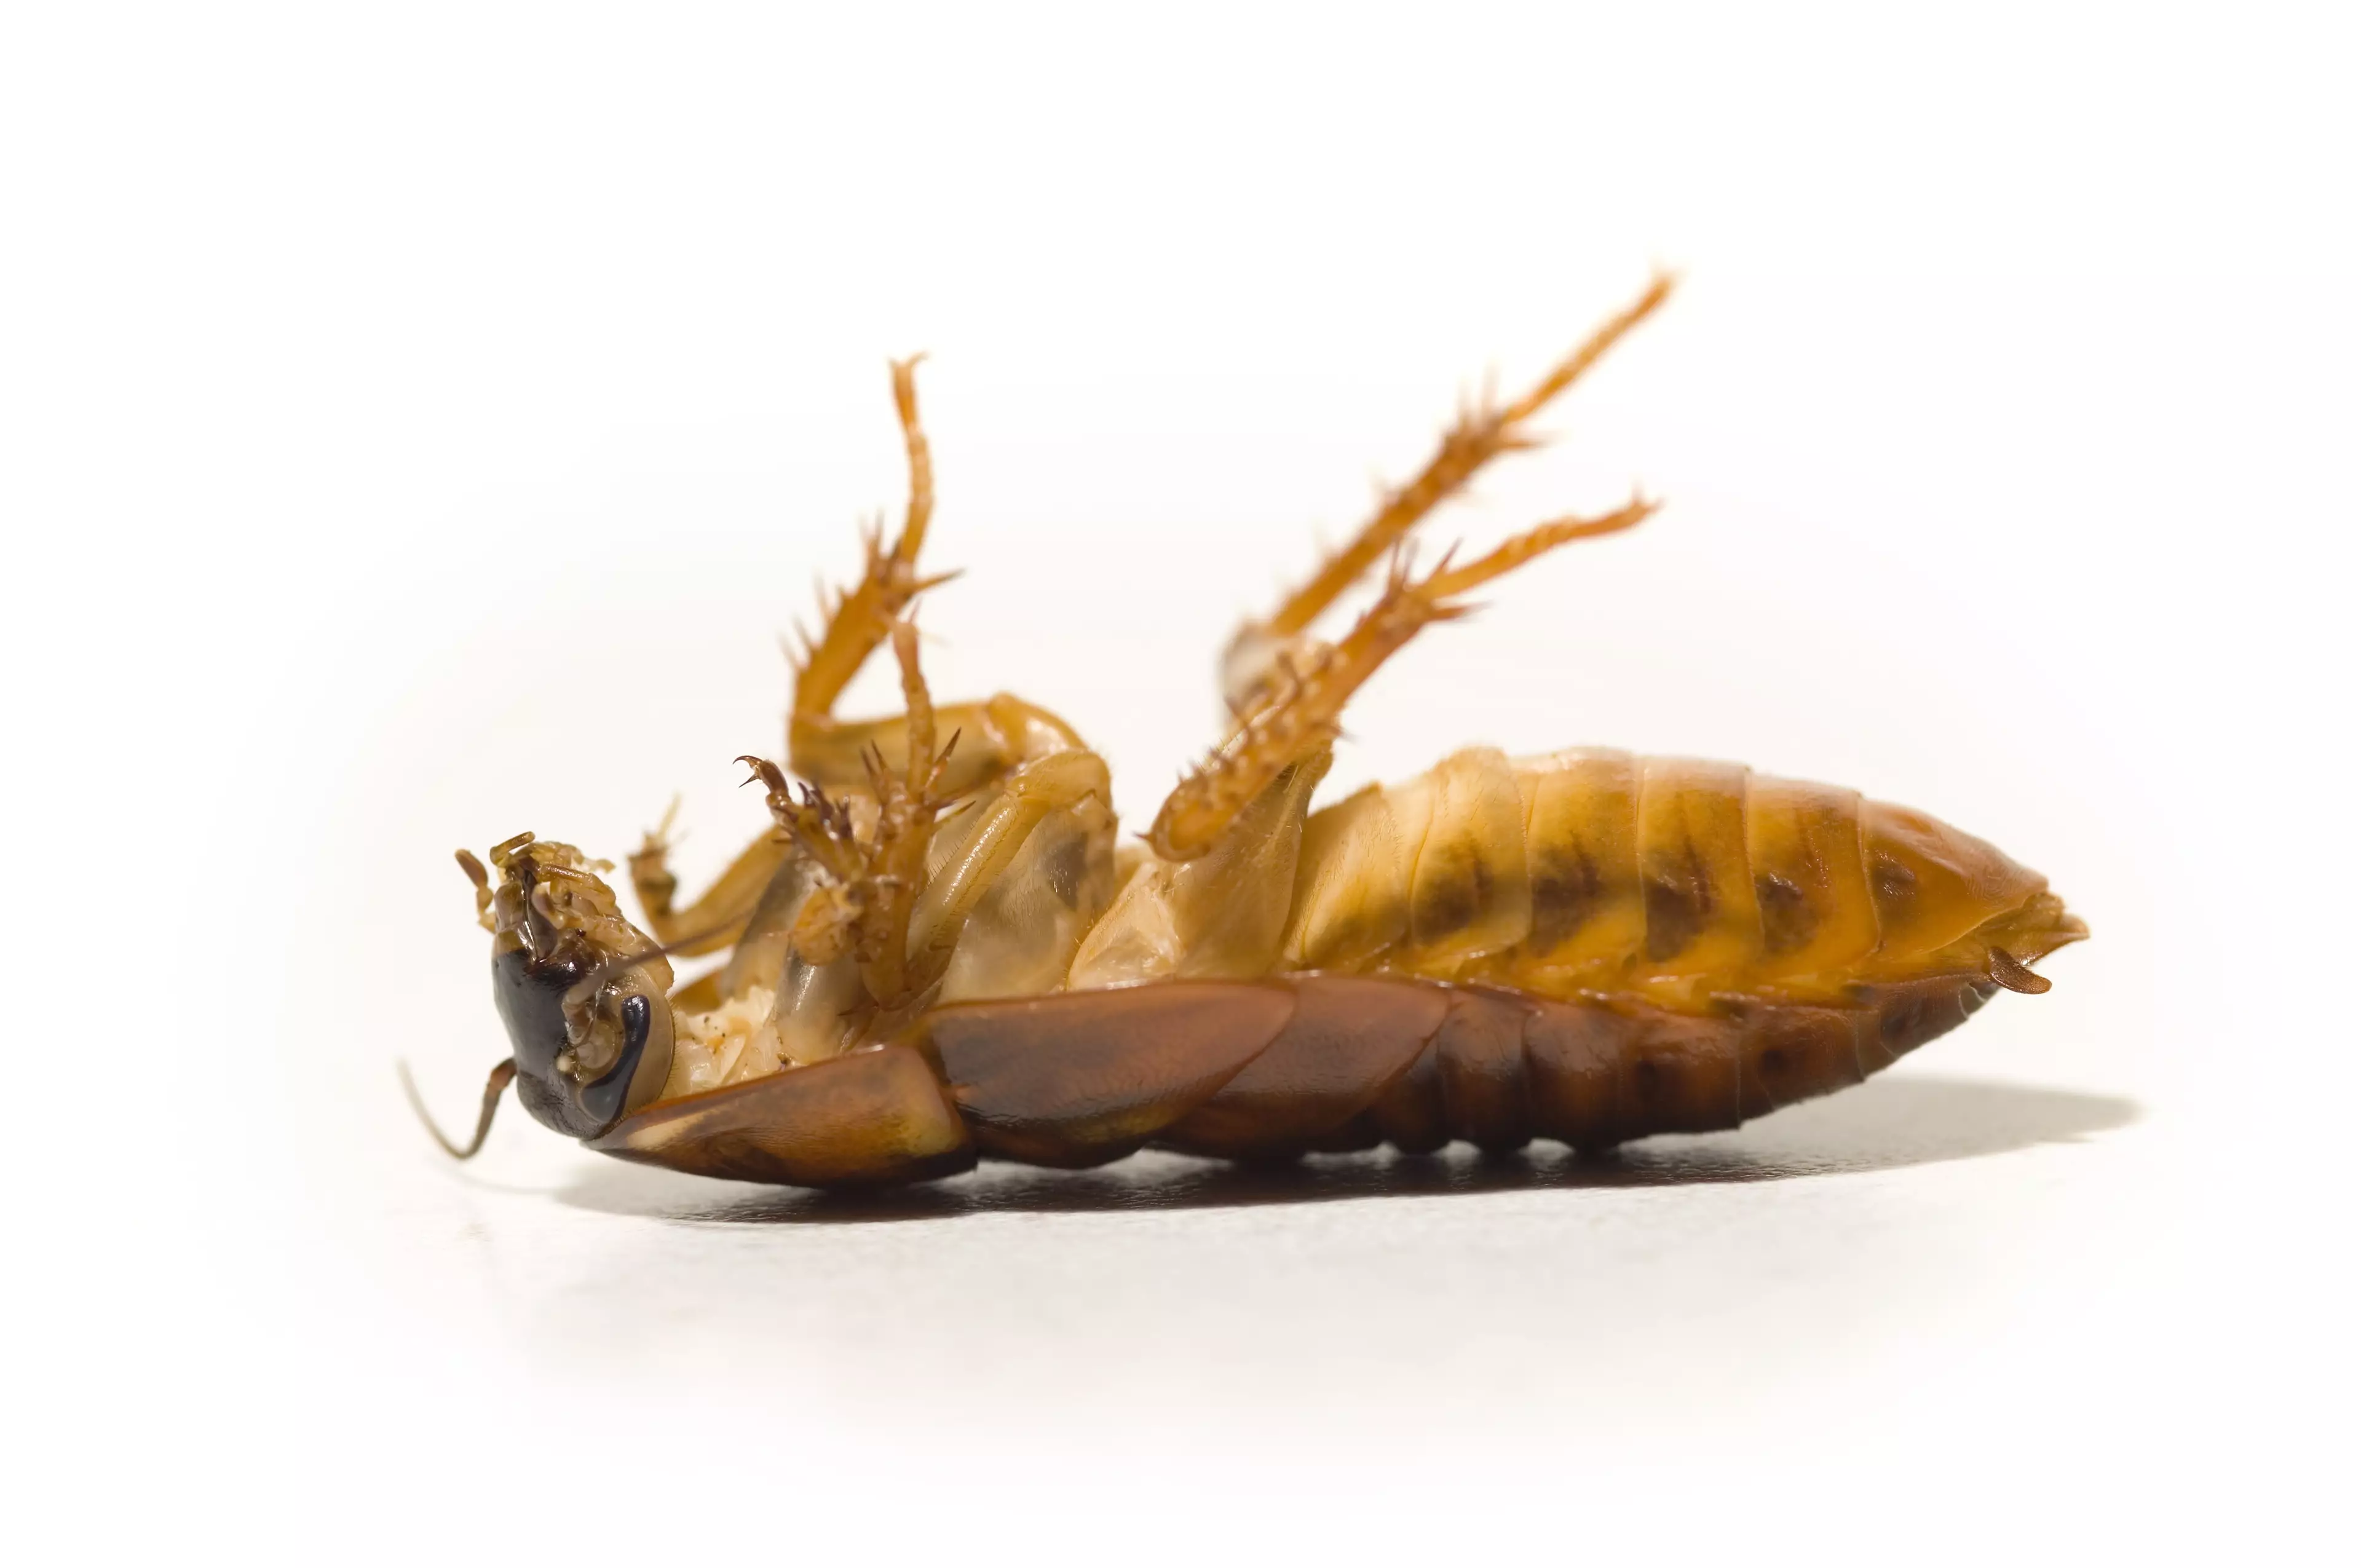 Cockroaches were already notoriously hardy insects.